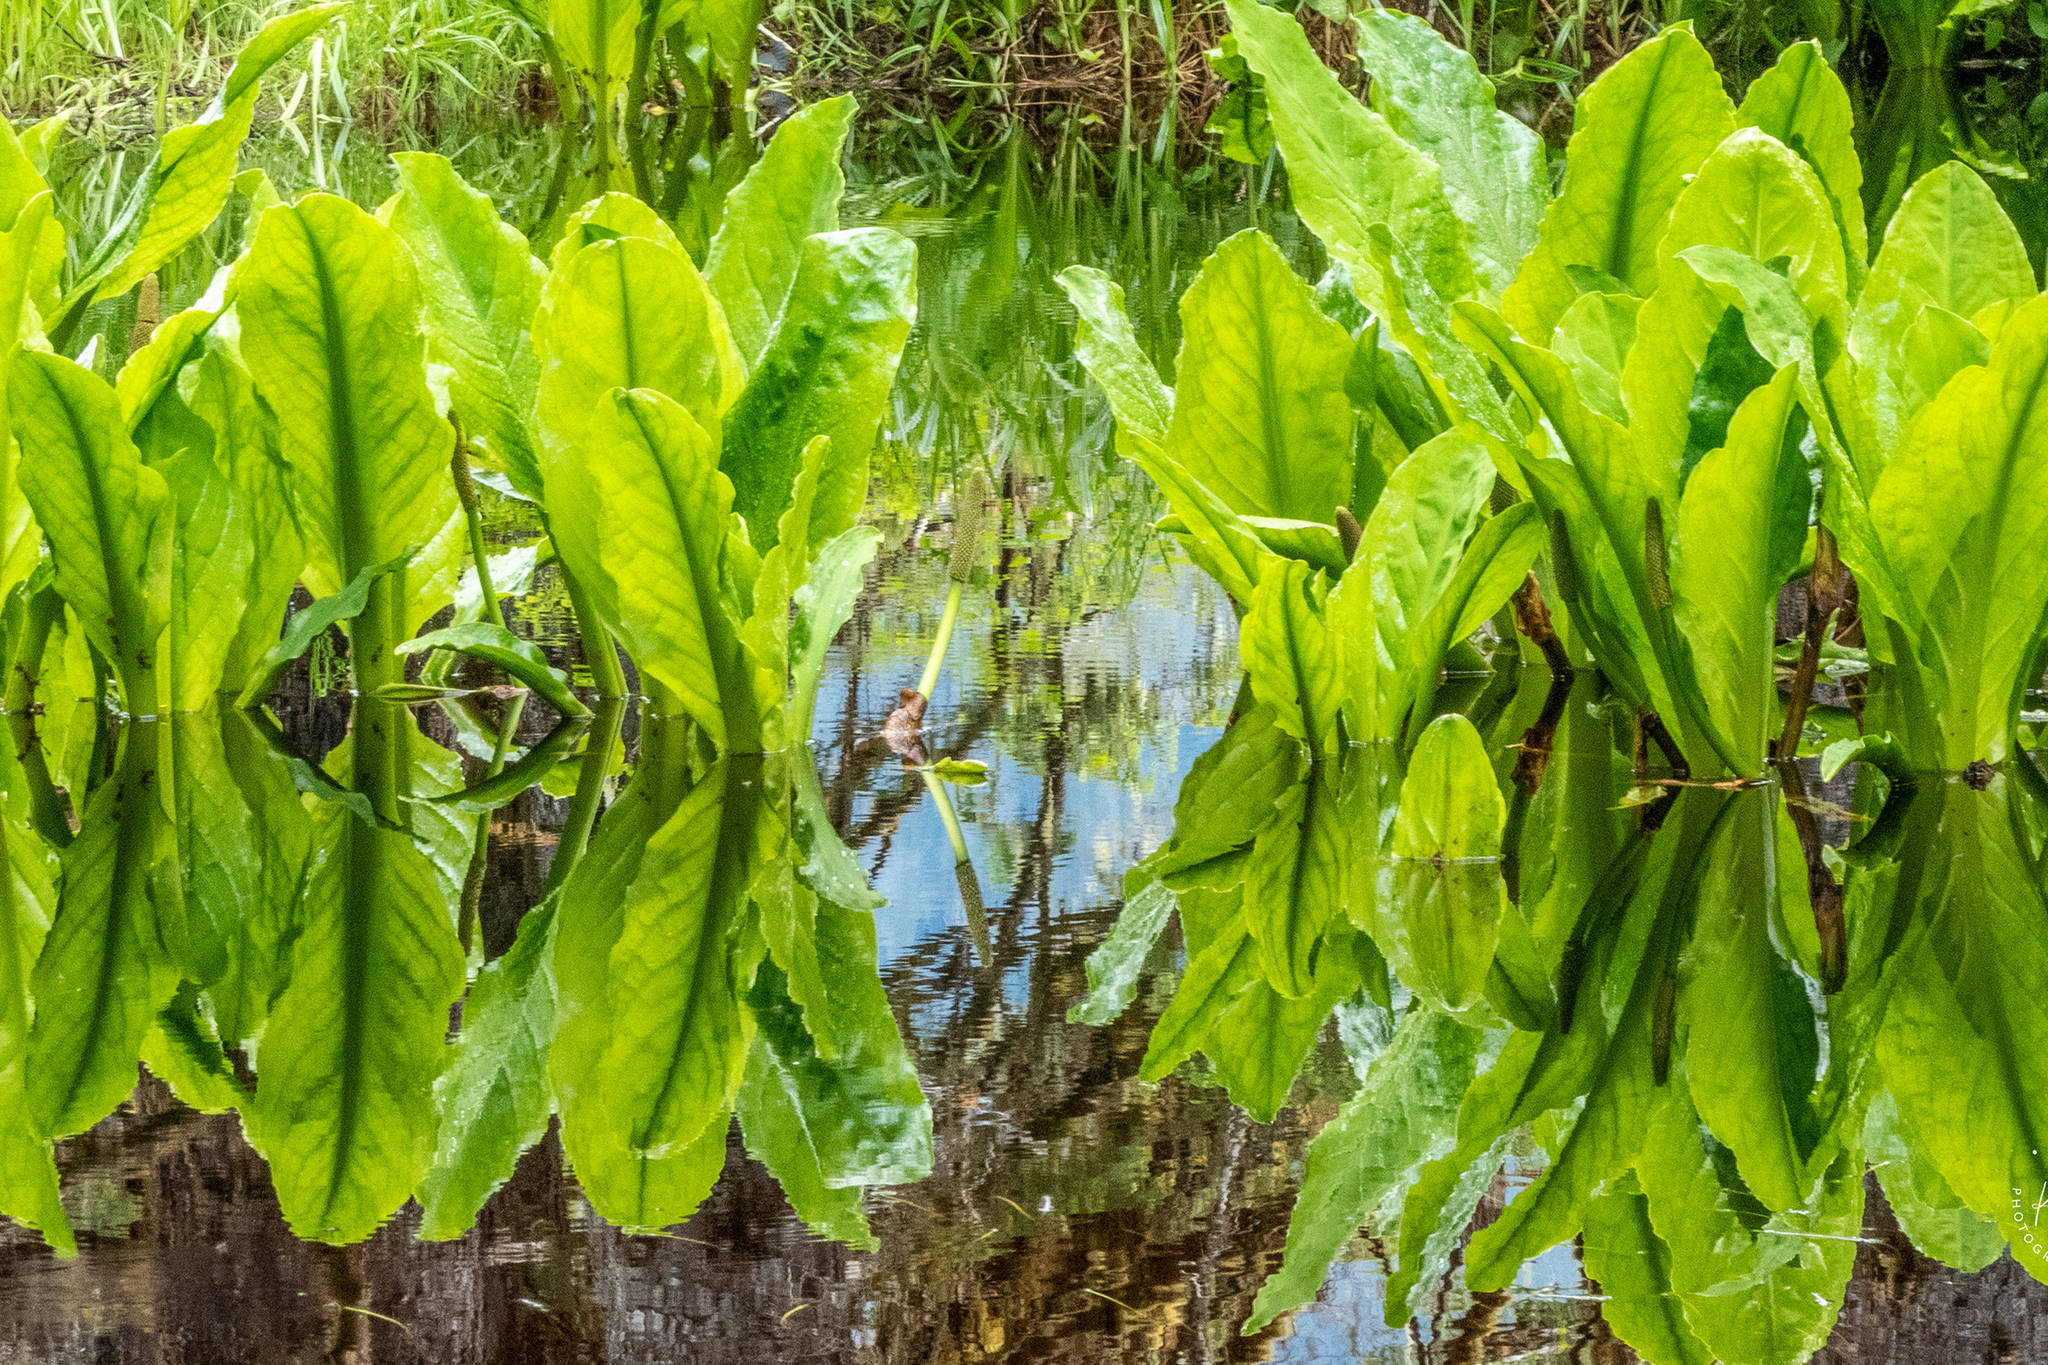 Skunk cabbage, shown in this undated photo, is not very cabbage-y and not at all skunky. Many common English names for plants are misnomers. (Courtesy Photo / Kerry Howard)